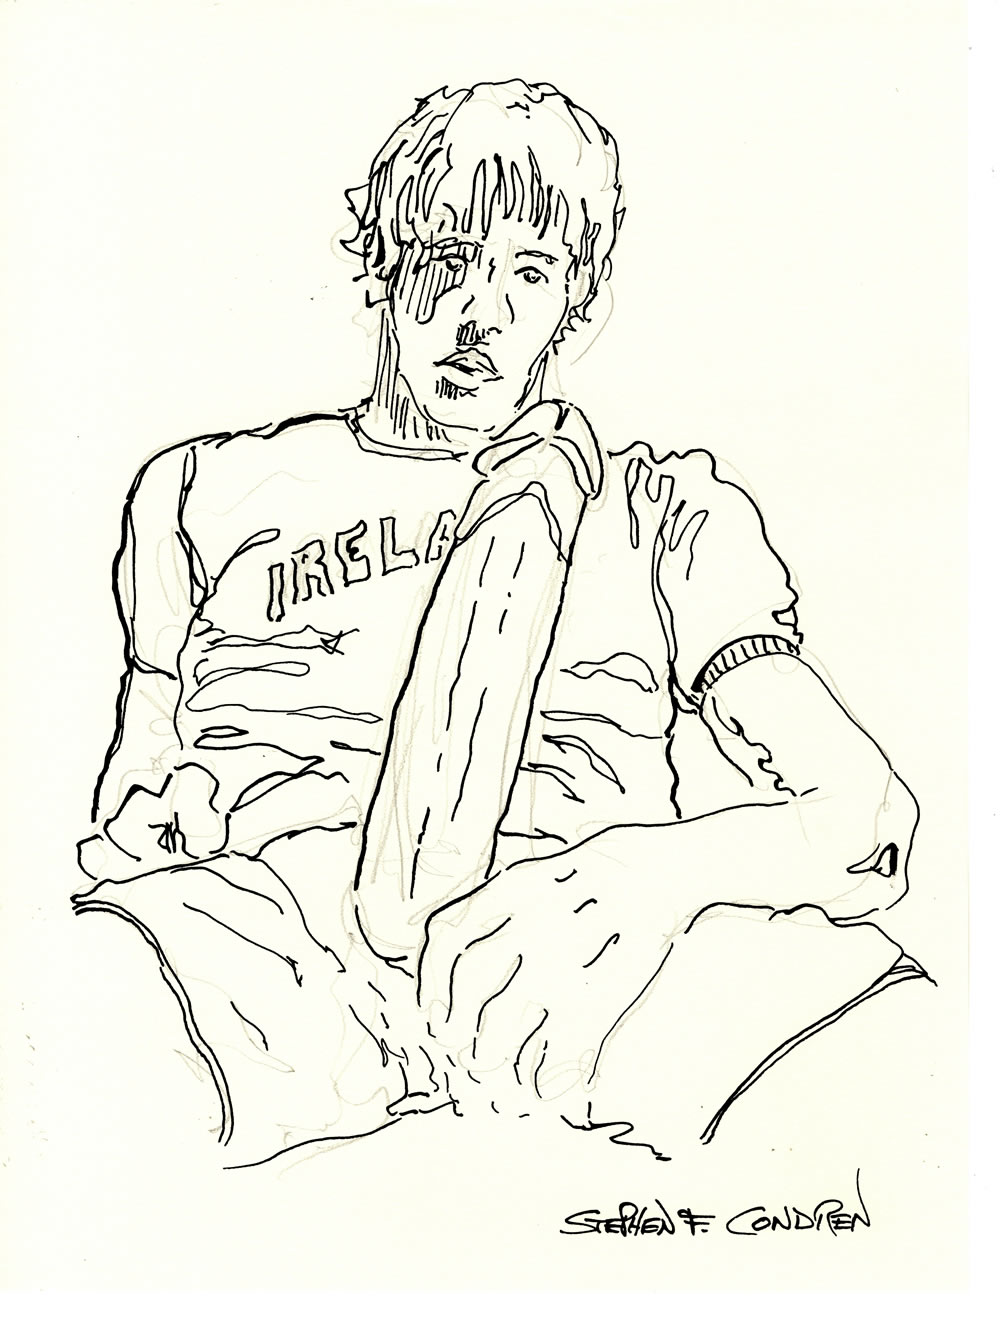 Pen & ink figure drawing of a hot boy holding his big hardon in his hand. He is cute with a muscular physique and cute.